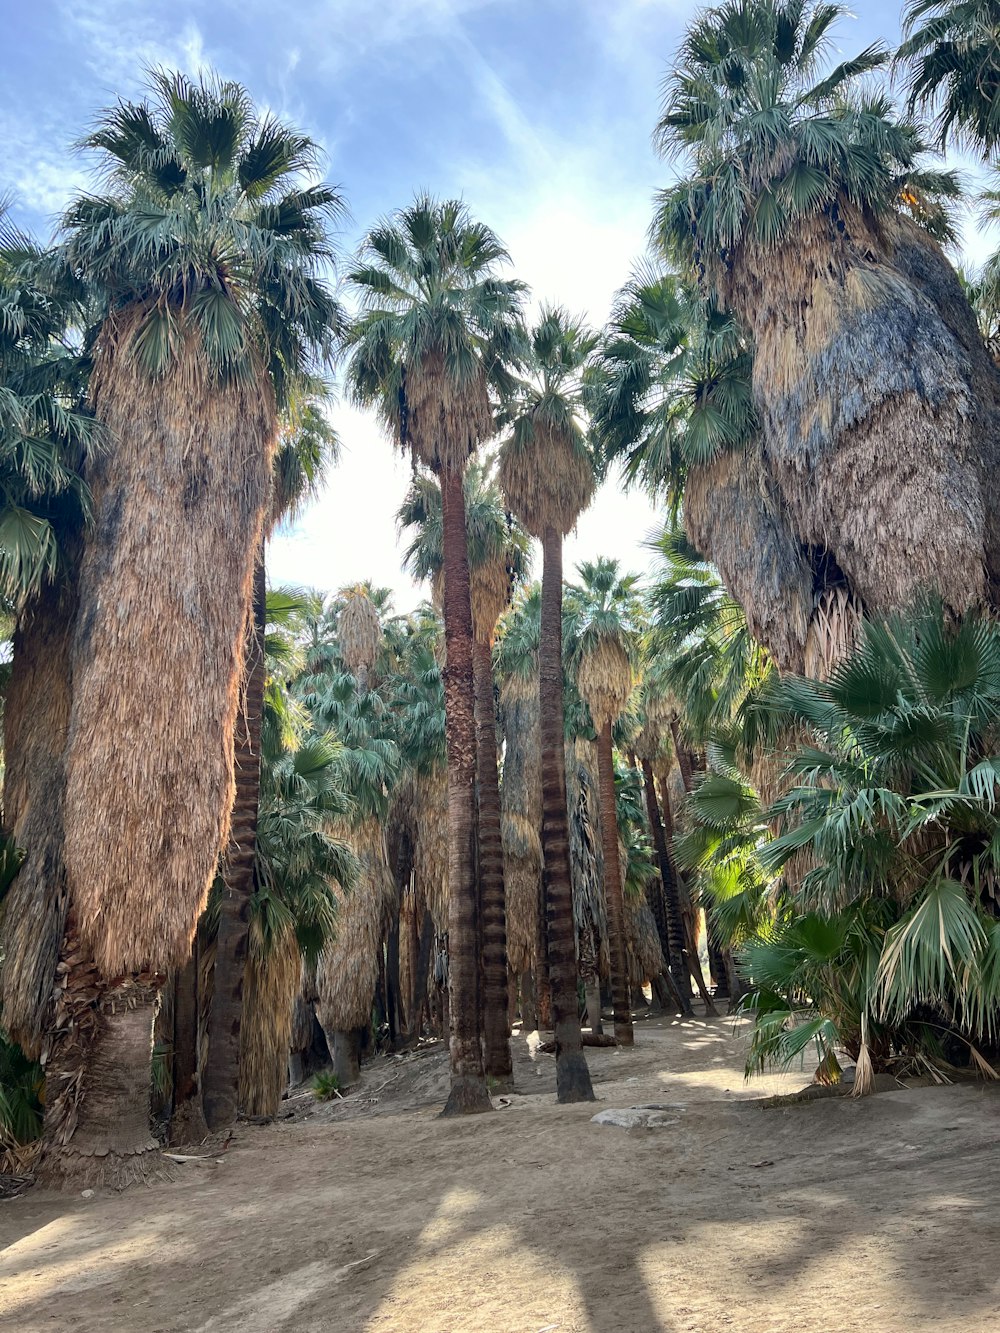 a group of palm trees in a sandy area